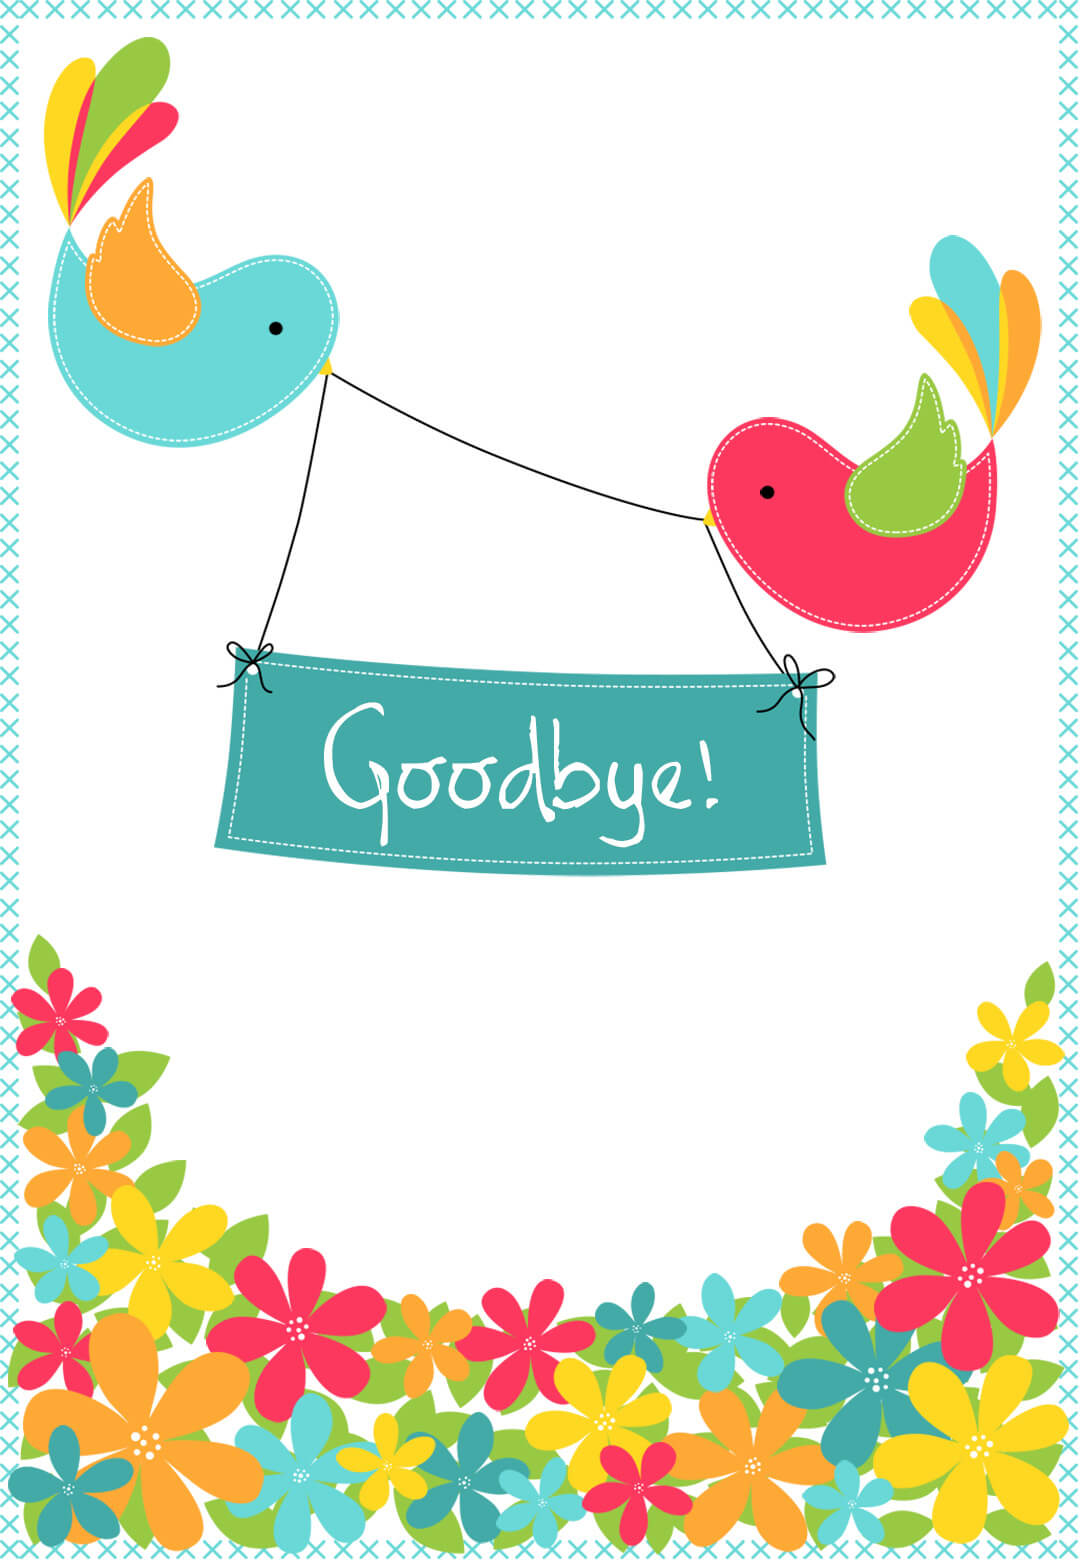 Goodbye From Your Colleagues – Good Luck Card (Free Pertaining To Good Luck Card Templates